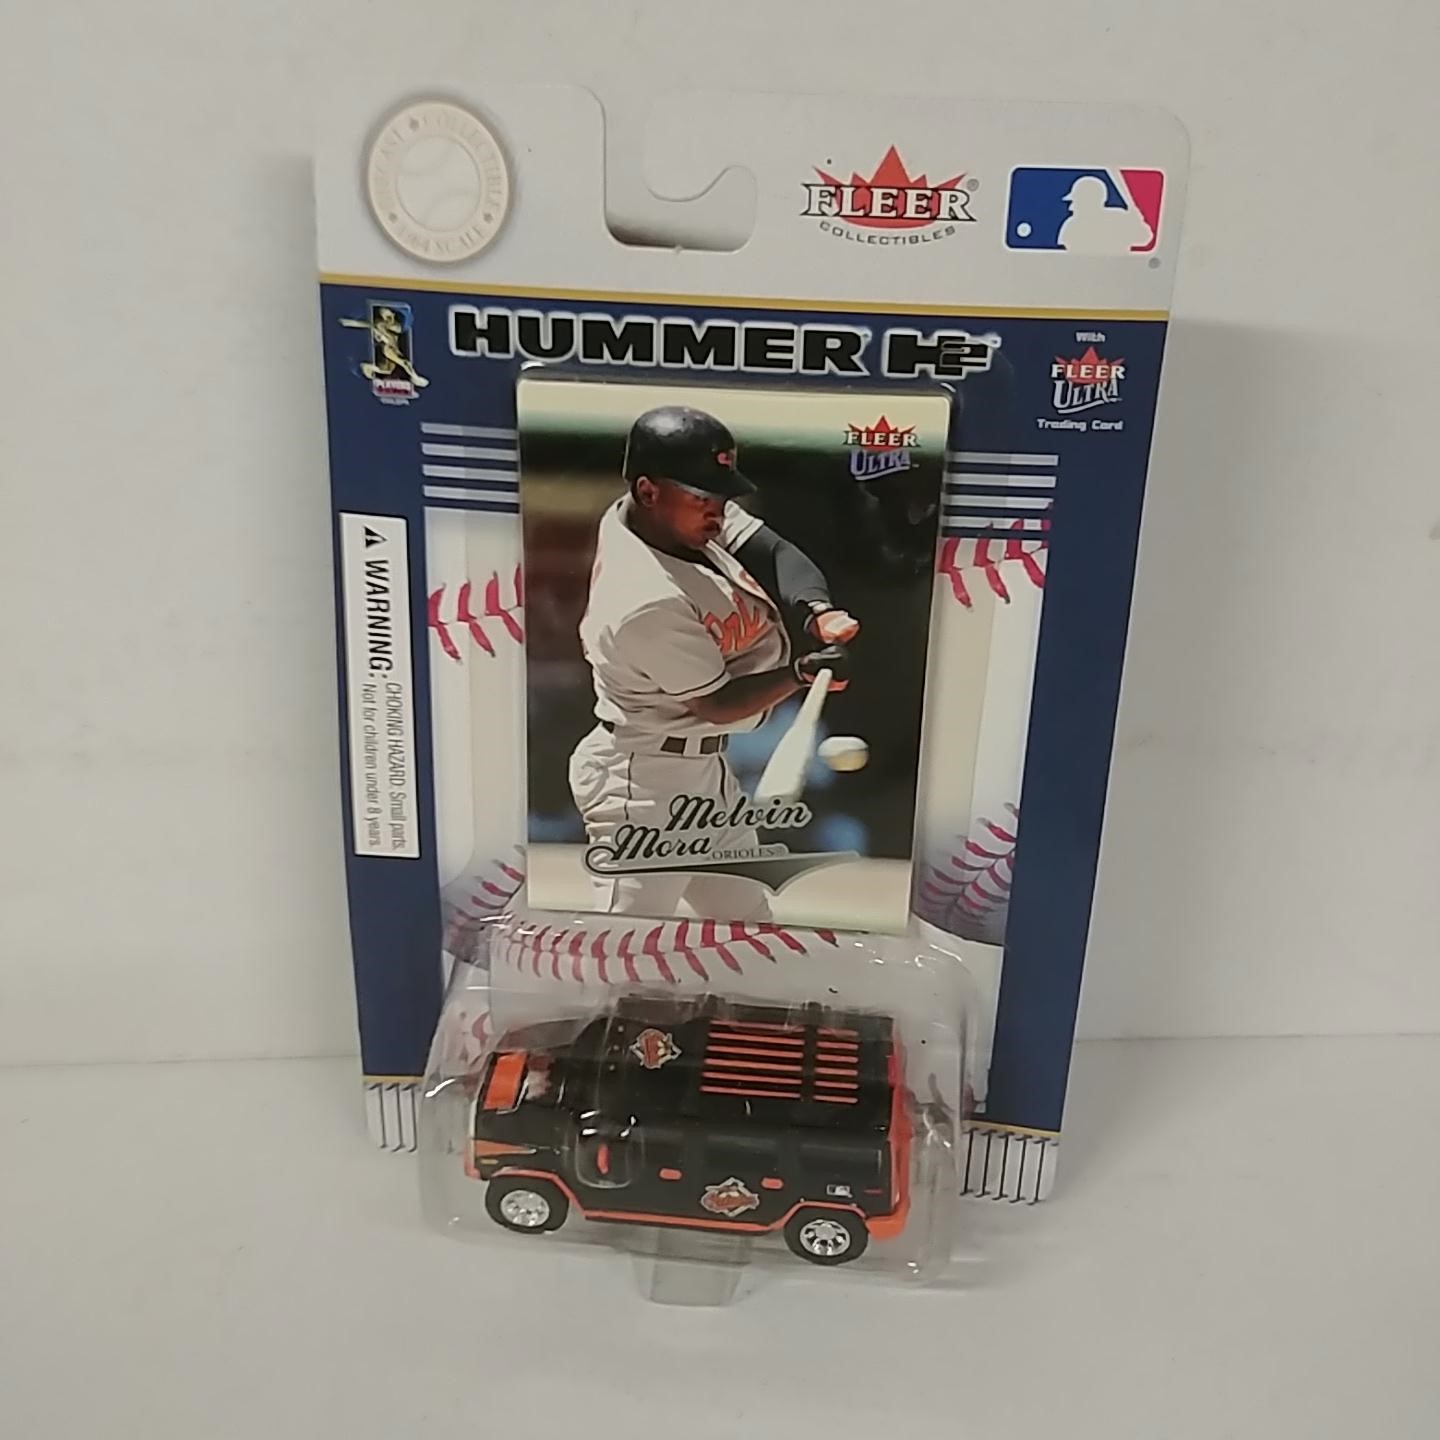 2004 Balitmore Orioles 1/64th Hummer with Melvin Mora trading card